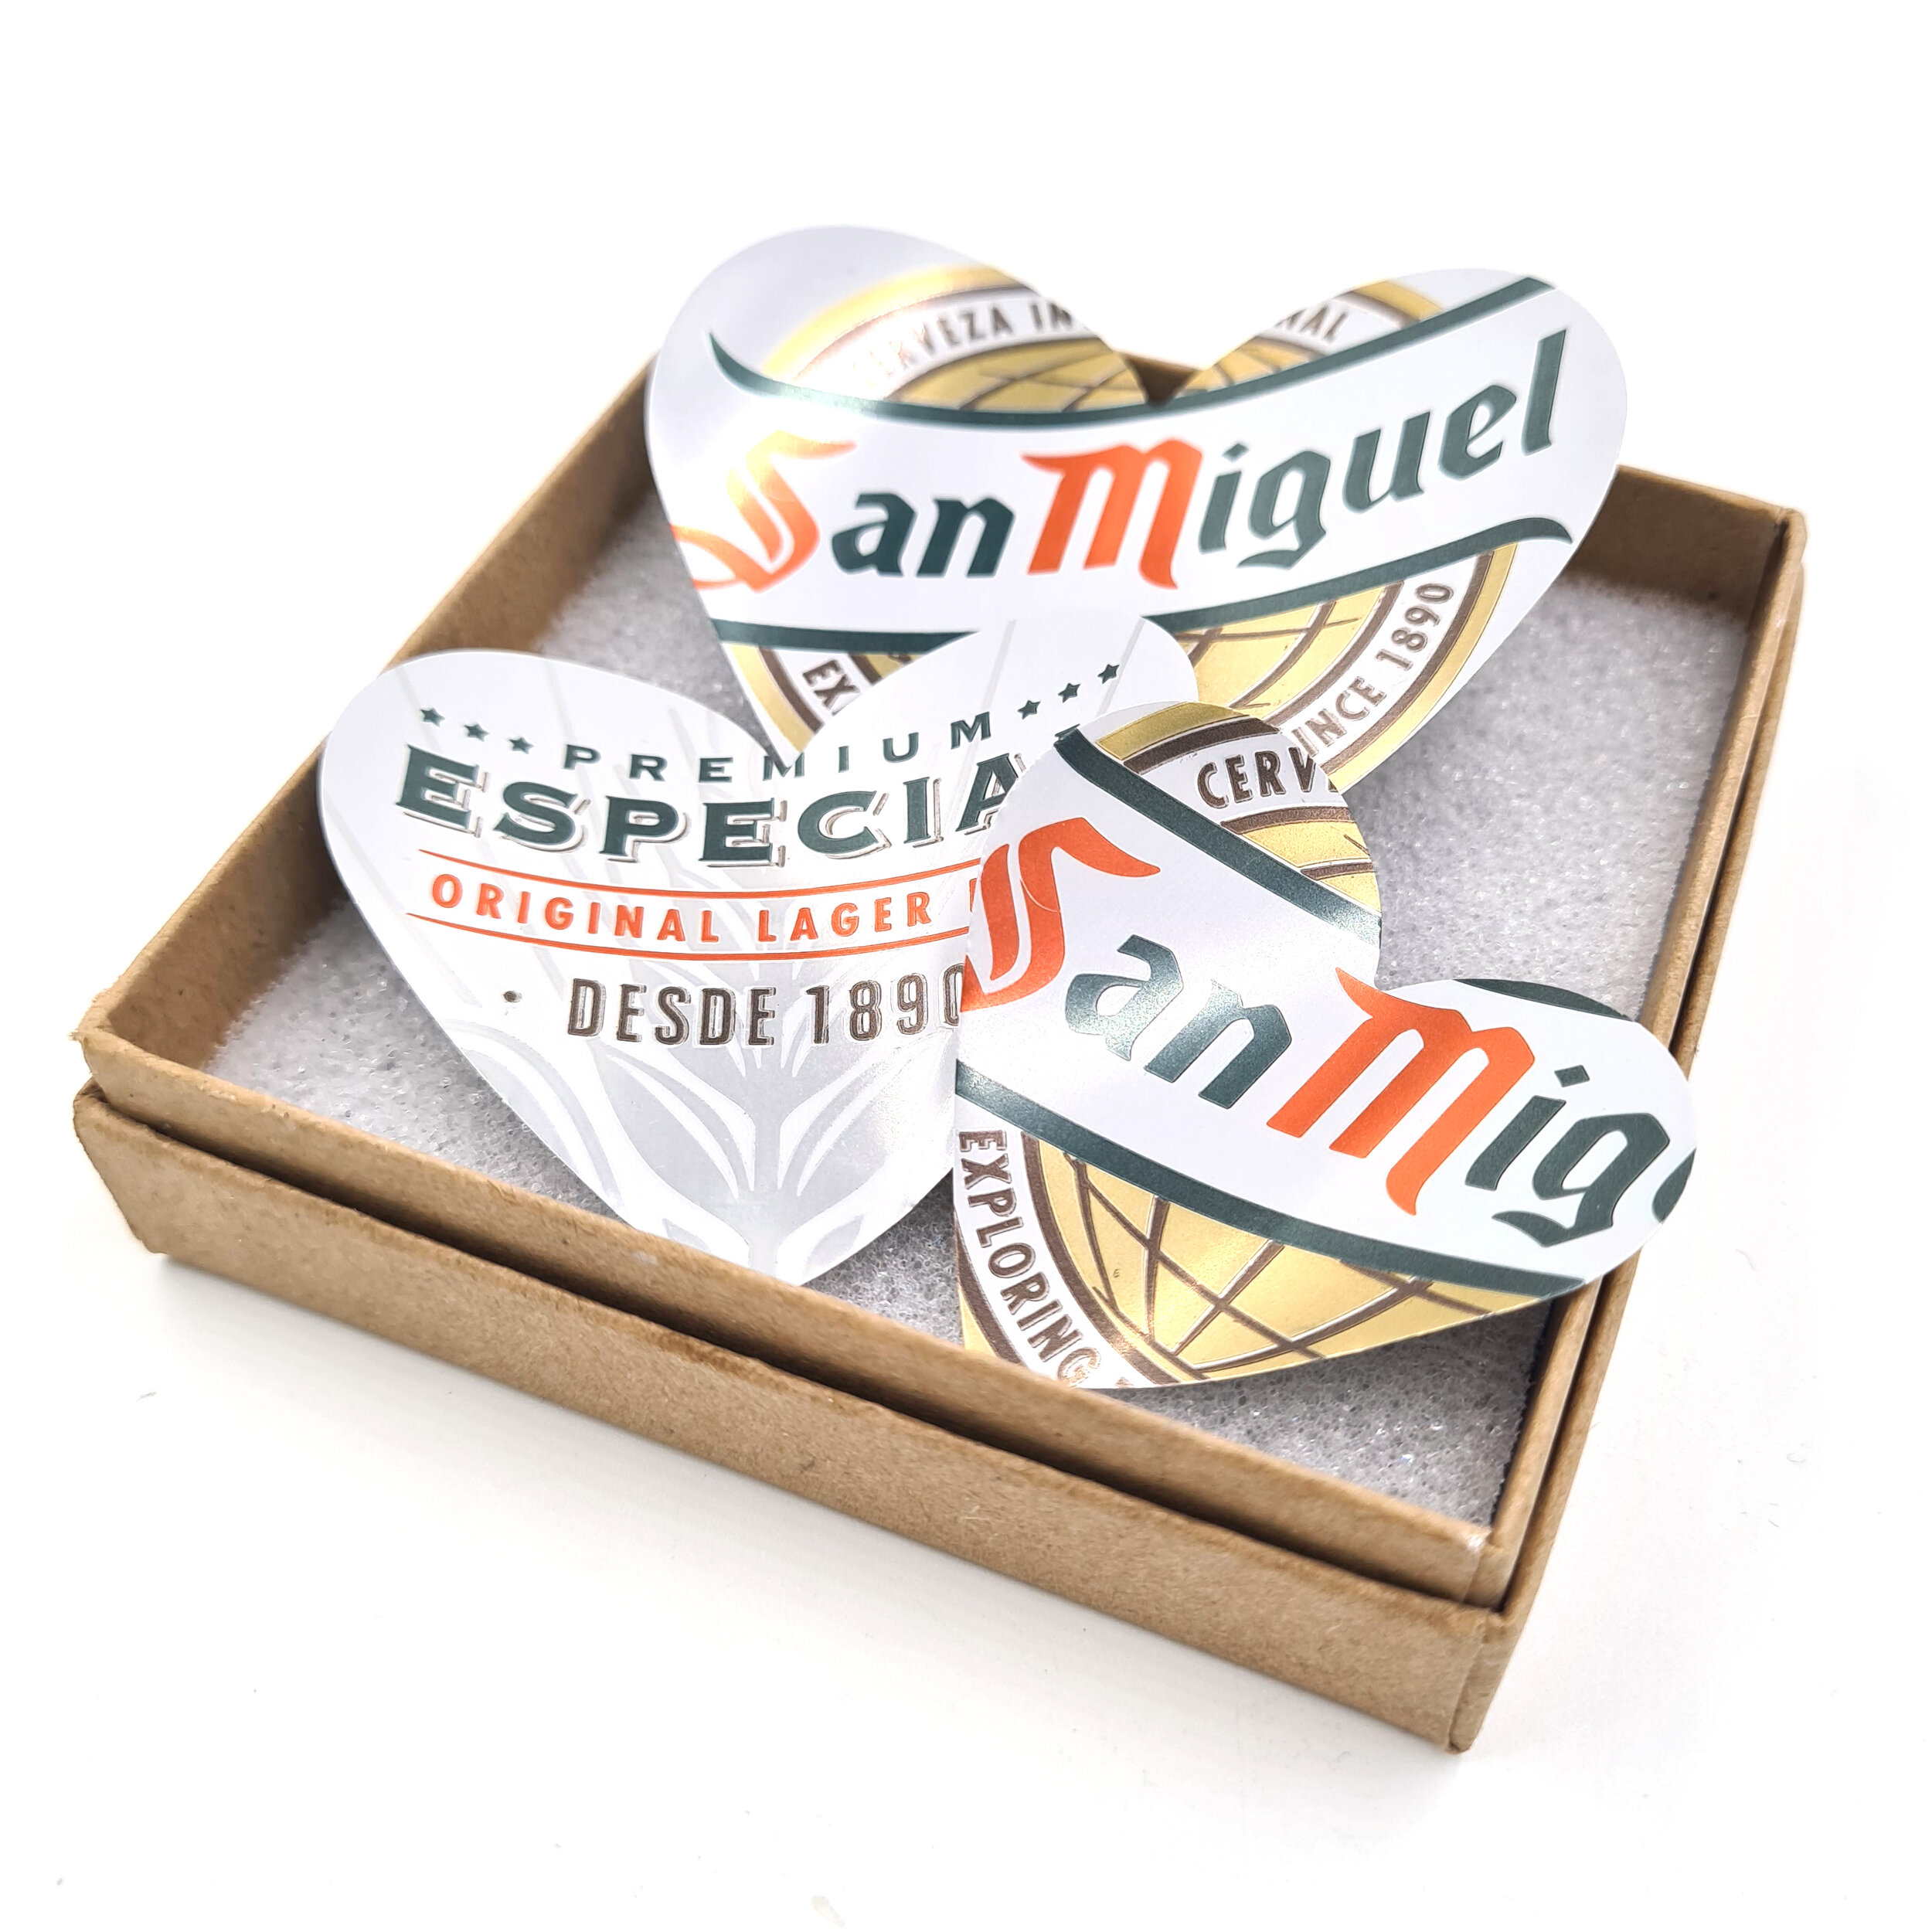 Curved gold sustainable San Miguel Heart Can Magnets in box